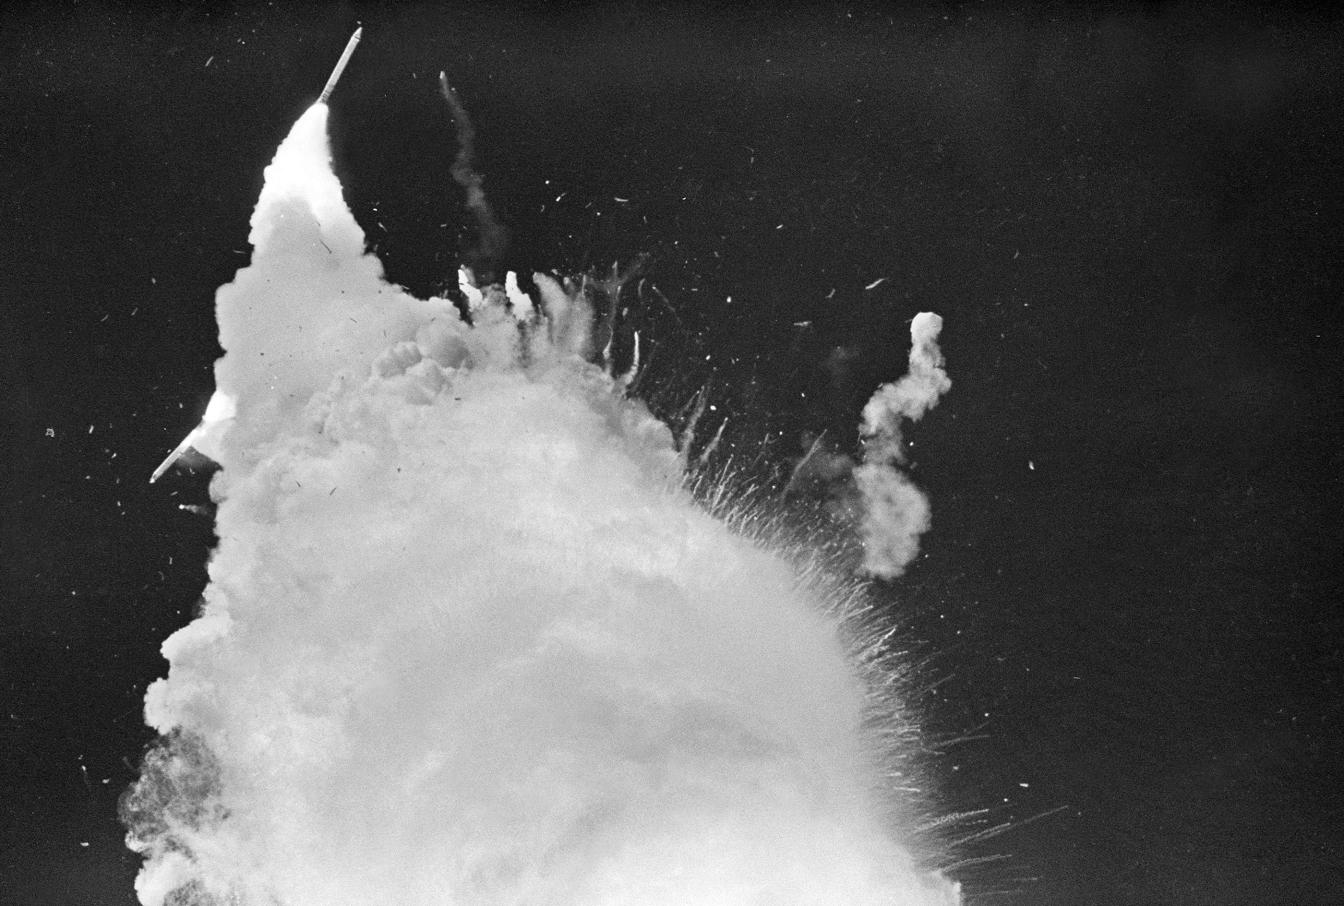 SPACE SHUTTLE CHALLENGER Explosion